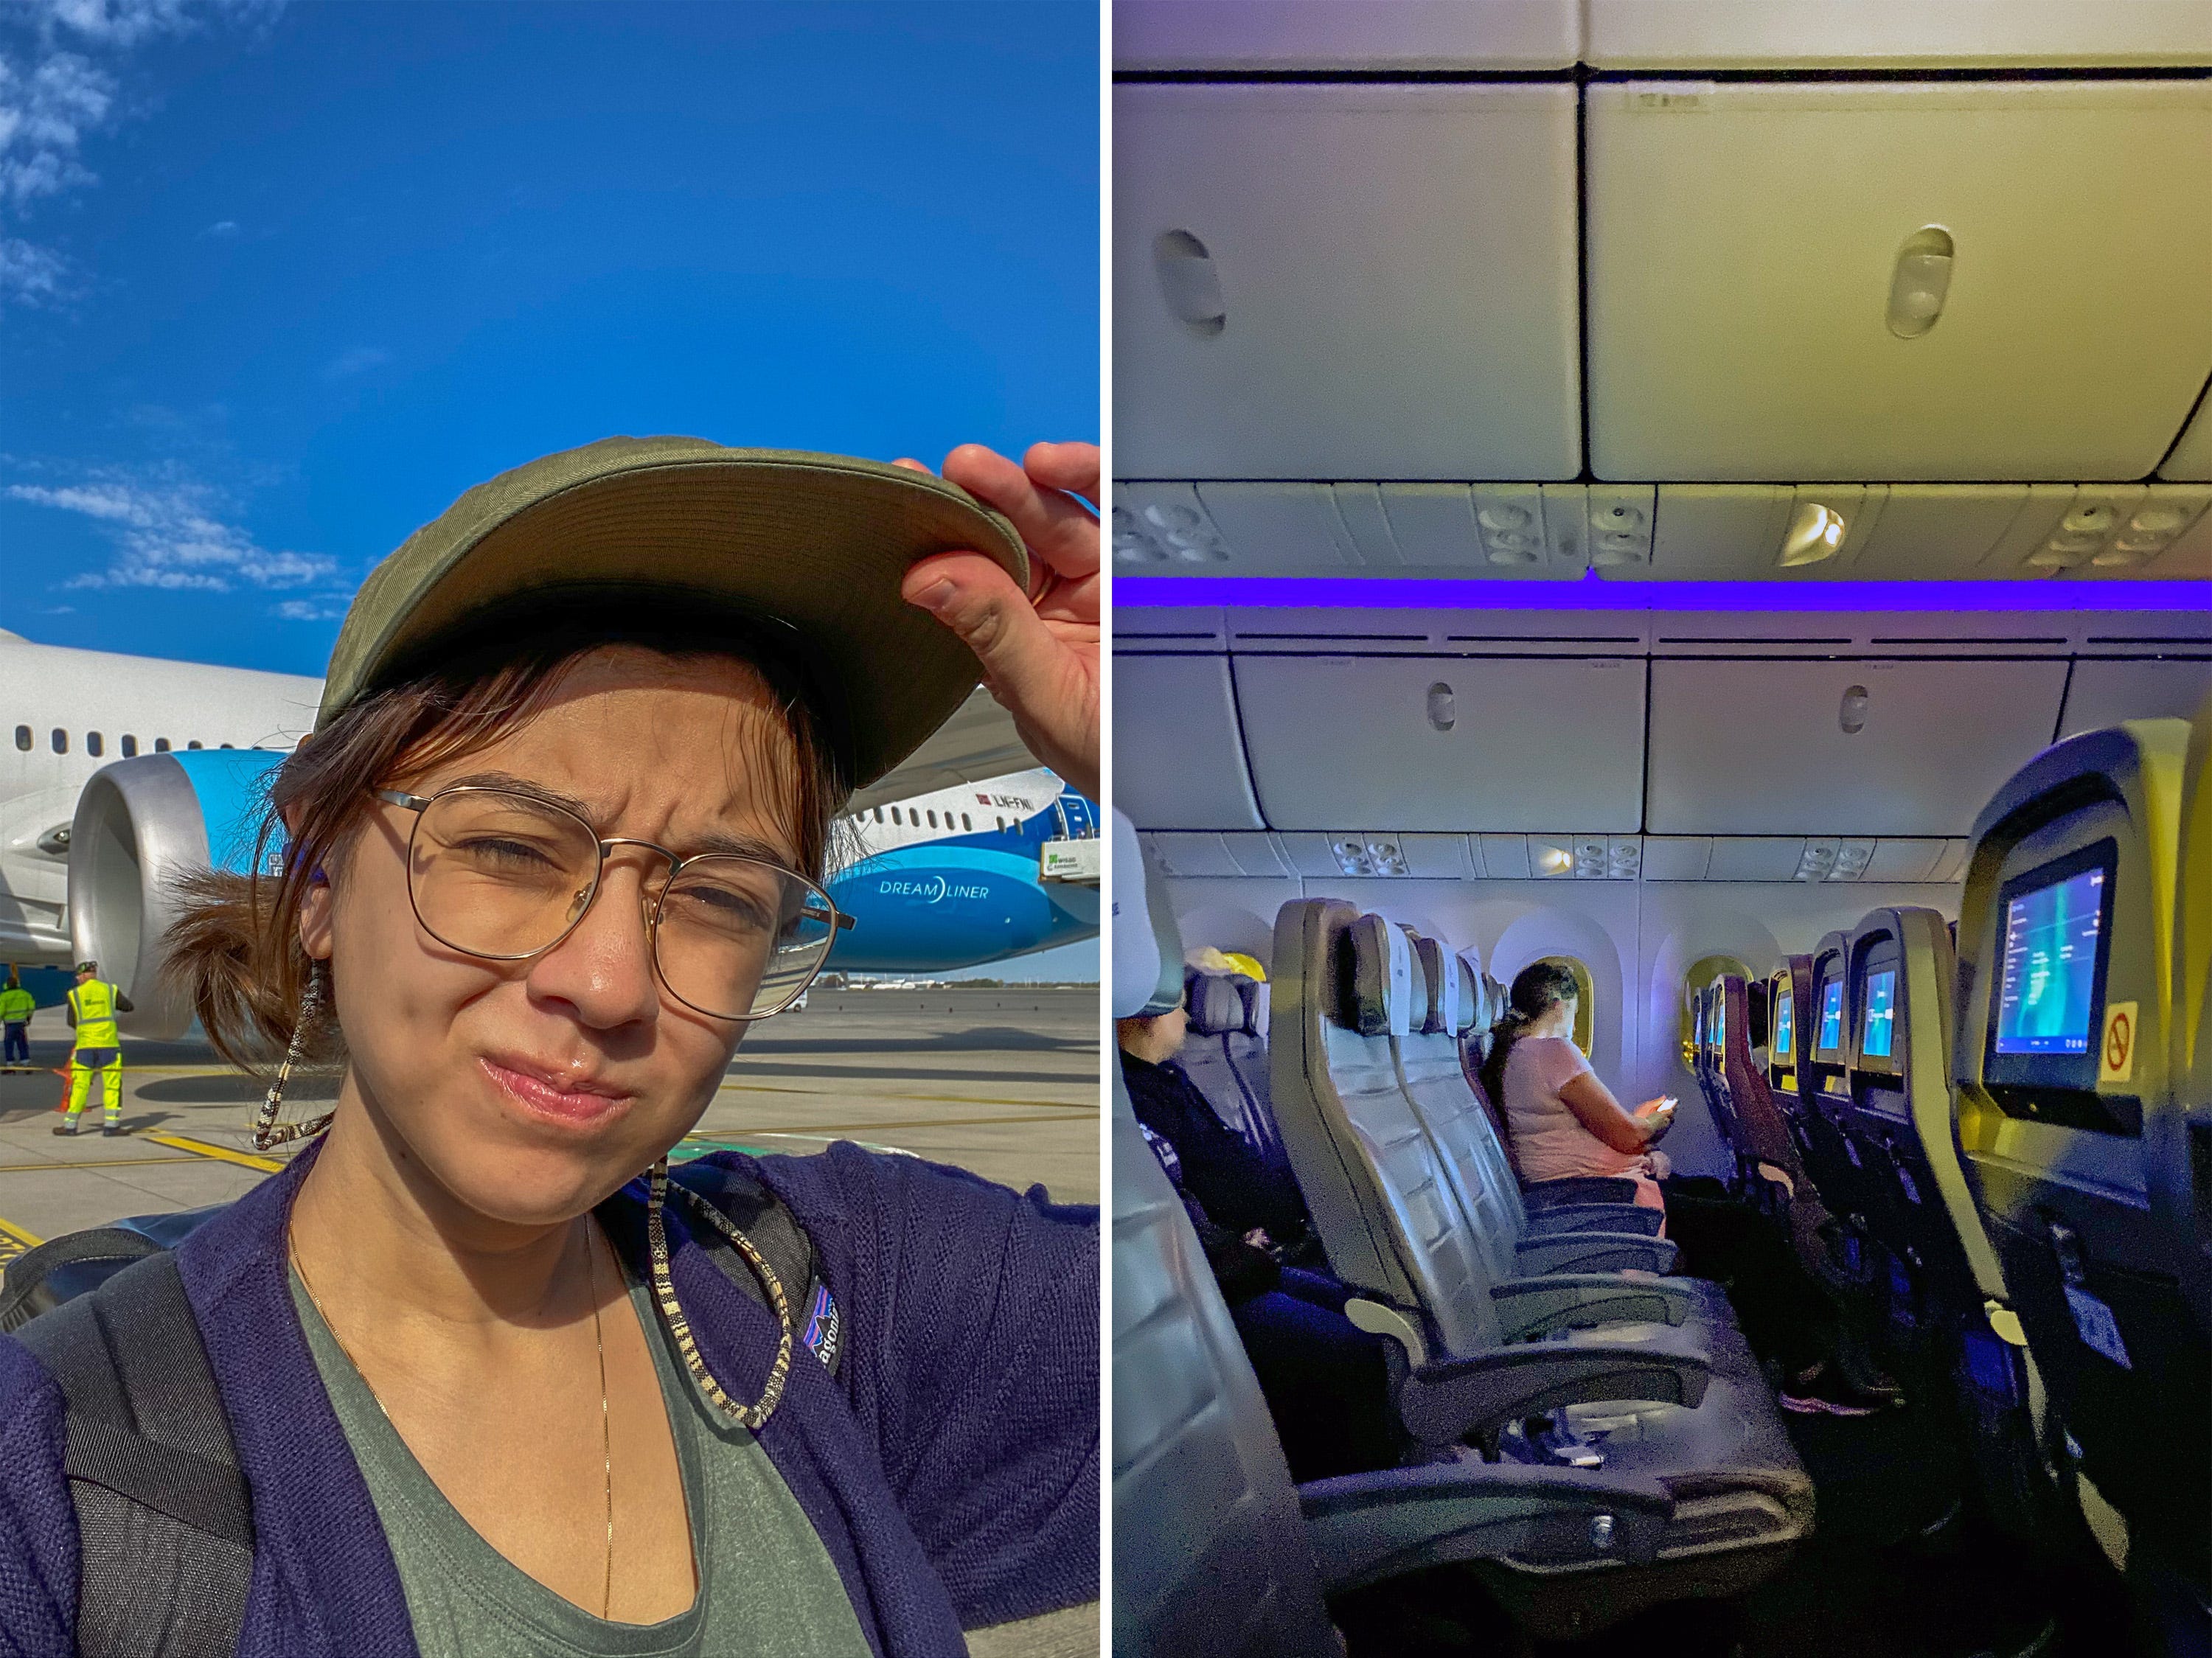 <ul class="summary-list"> <li>I took a red-eye flight from NYC to Berlin to start a two-week trip to Europe in October 2022.</li> <li>For $180, I flew through the night with <a href="https://flynorse.com/en-US" rel="nofollow noopener sponsored">Norse Atlantic Airways</a> and had a row of seats to myself. </li> <li>Although I thought the flight itself was ideal for a red-eye, I started my trip feeling exhausted.</li> </ul><p>In October 2022, I flew from my home in NYC to Berlin for a two-week <a href="https://www.businessinsider.com/business-class-vs-first-class-trenitalia-europe-trains-photos-2023-1">train trip through Europe</a>.</p><p>When booking air travel, I usually choose the cheapest <a href="https://www.businessinsider.com/jet-blue-and-american-airlines-economy-domestic-flights-compared-2019-10">nonstop flight</a> leaving from my local airport, John F. Kennedy International Airport (JFK). For this trip, that option was an eight-hour <a href="https://www.businessinsider.com/avoid-jet-lag-book-international-red-eye-flight-2023-8">red-eye flight</a> on an airline I'd never heard of, <a href="https://www.businessinsider.com/norse-atlantic-flight-review-paris-new-york-2023-6">Norse Atlantic Airways</a>.</p><p>Norse Atlantic Airways is a new budget airline that started flying in 2022 with nonstop trips from the US to Germany, Norway, the UK, France, and Italy, <a href="https://flynorse.com/en-US">according to its website</a>.</p><p>I booked the lowest tier of ticket — economy light, which included a seat and space to store a personal item for $88. I also paid $75 to select my window seat in advance and a $20 check-in fee at the airport, for a grand total of $183.</p><p>I like how domestic red-eye flights give me an extra day at my destination, but I'd never taken one internationally. And I found that the long-haul flight through the night left me exhausted at the beginning of my trip. To me, it wasn't worth the day I saved.</p><div class="read-original">Read the original article on <a href="https://www.businessinsider.com/flying-budget-norse-atlantic-airways-red-eye-flight-photos-2023-2">Business Insider</a></div>